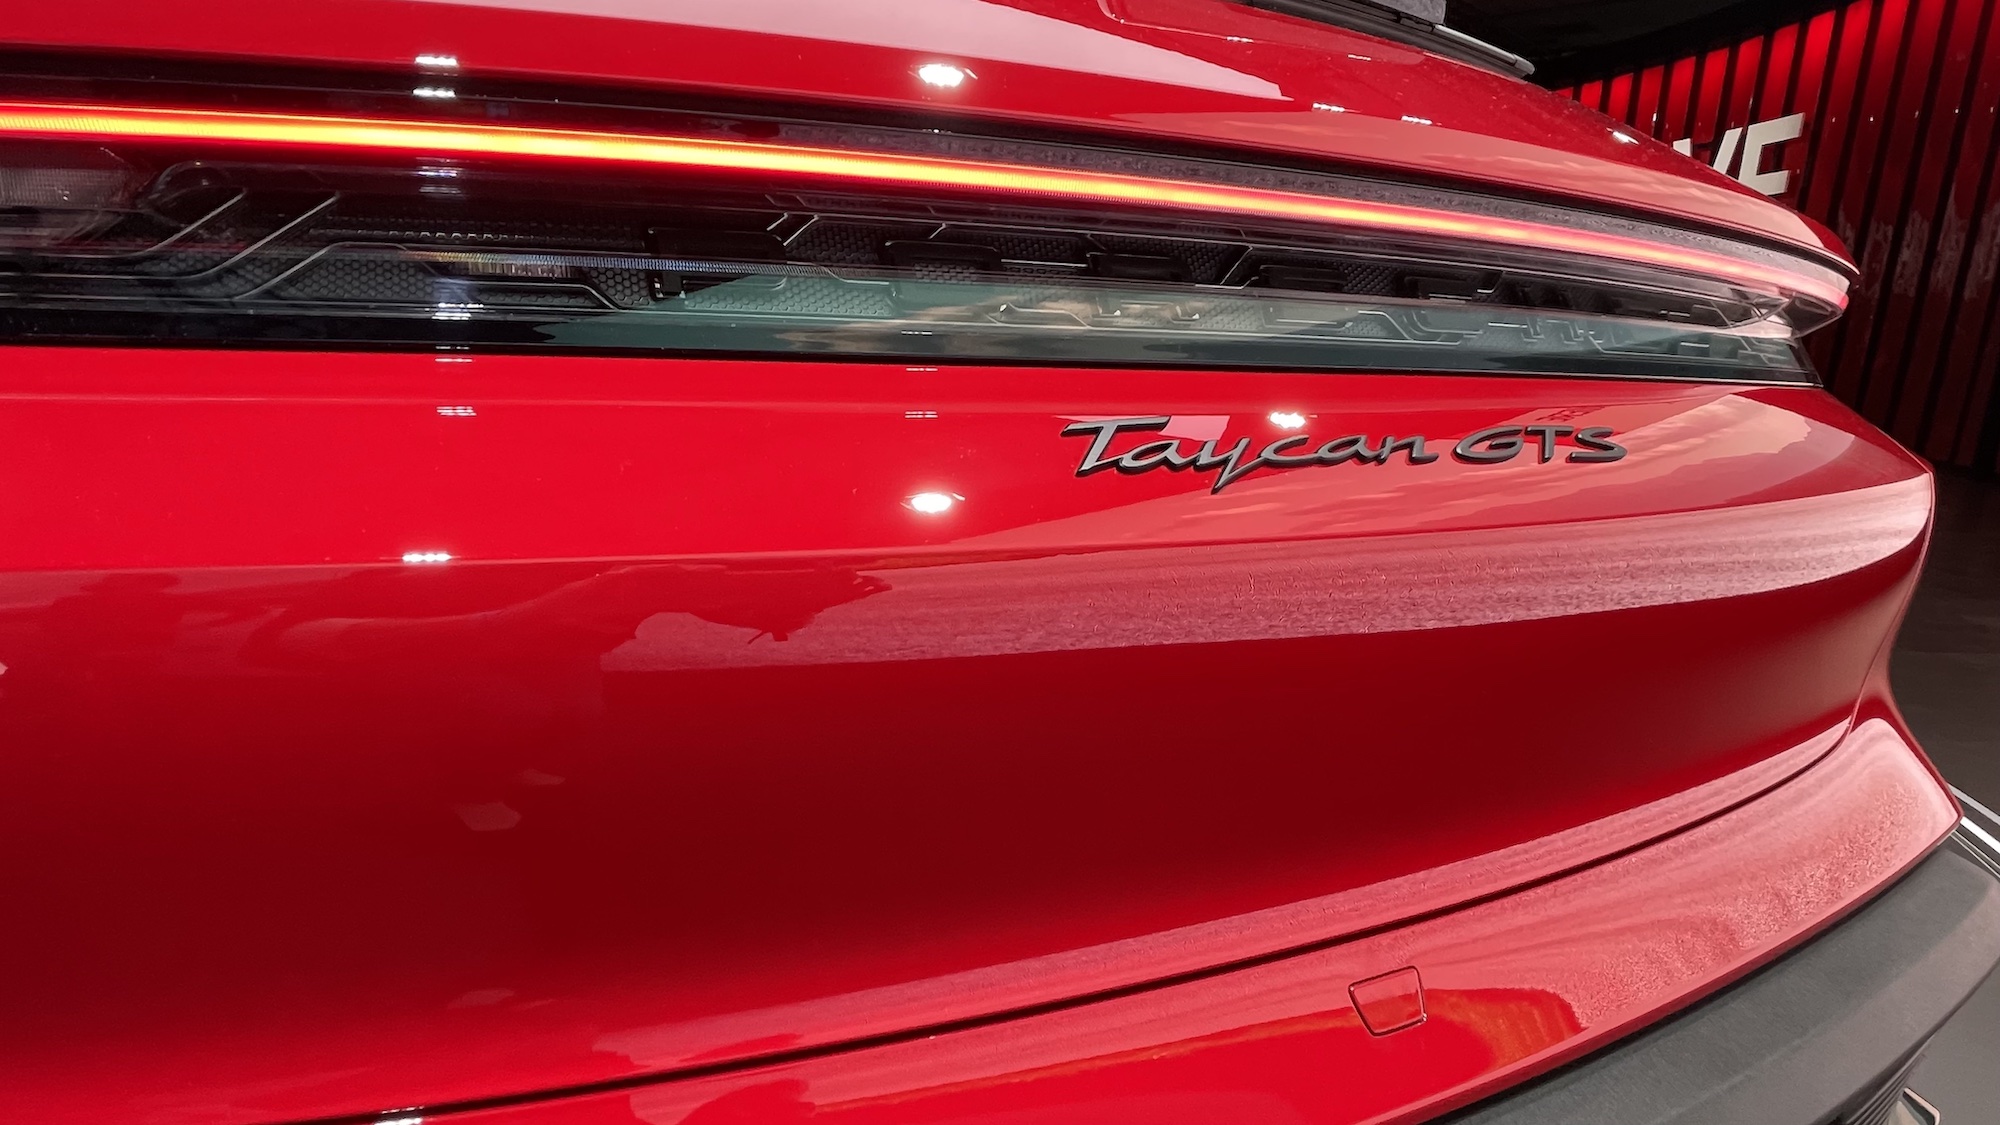 Porsche takes the GTS electric with the Taycan sedan and sporty wagon